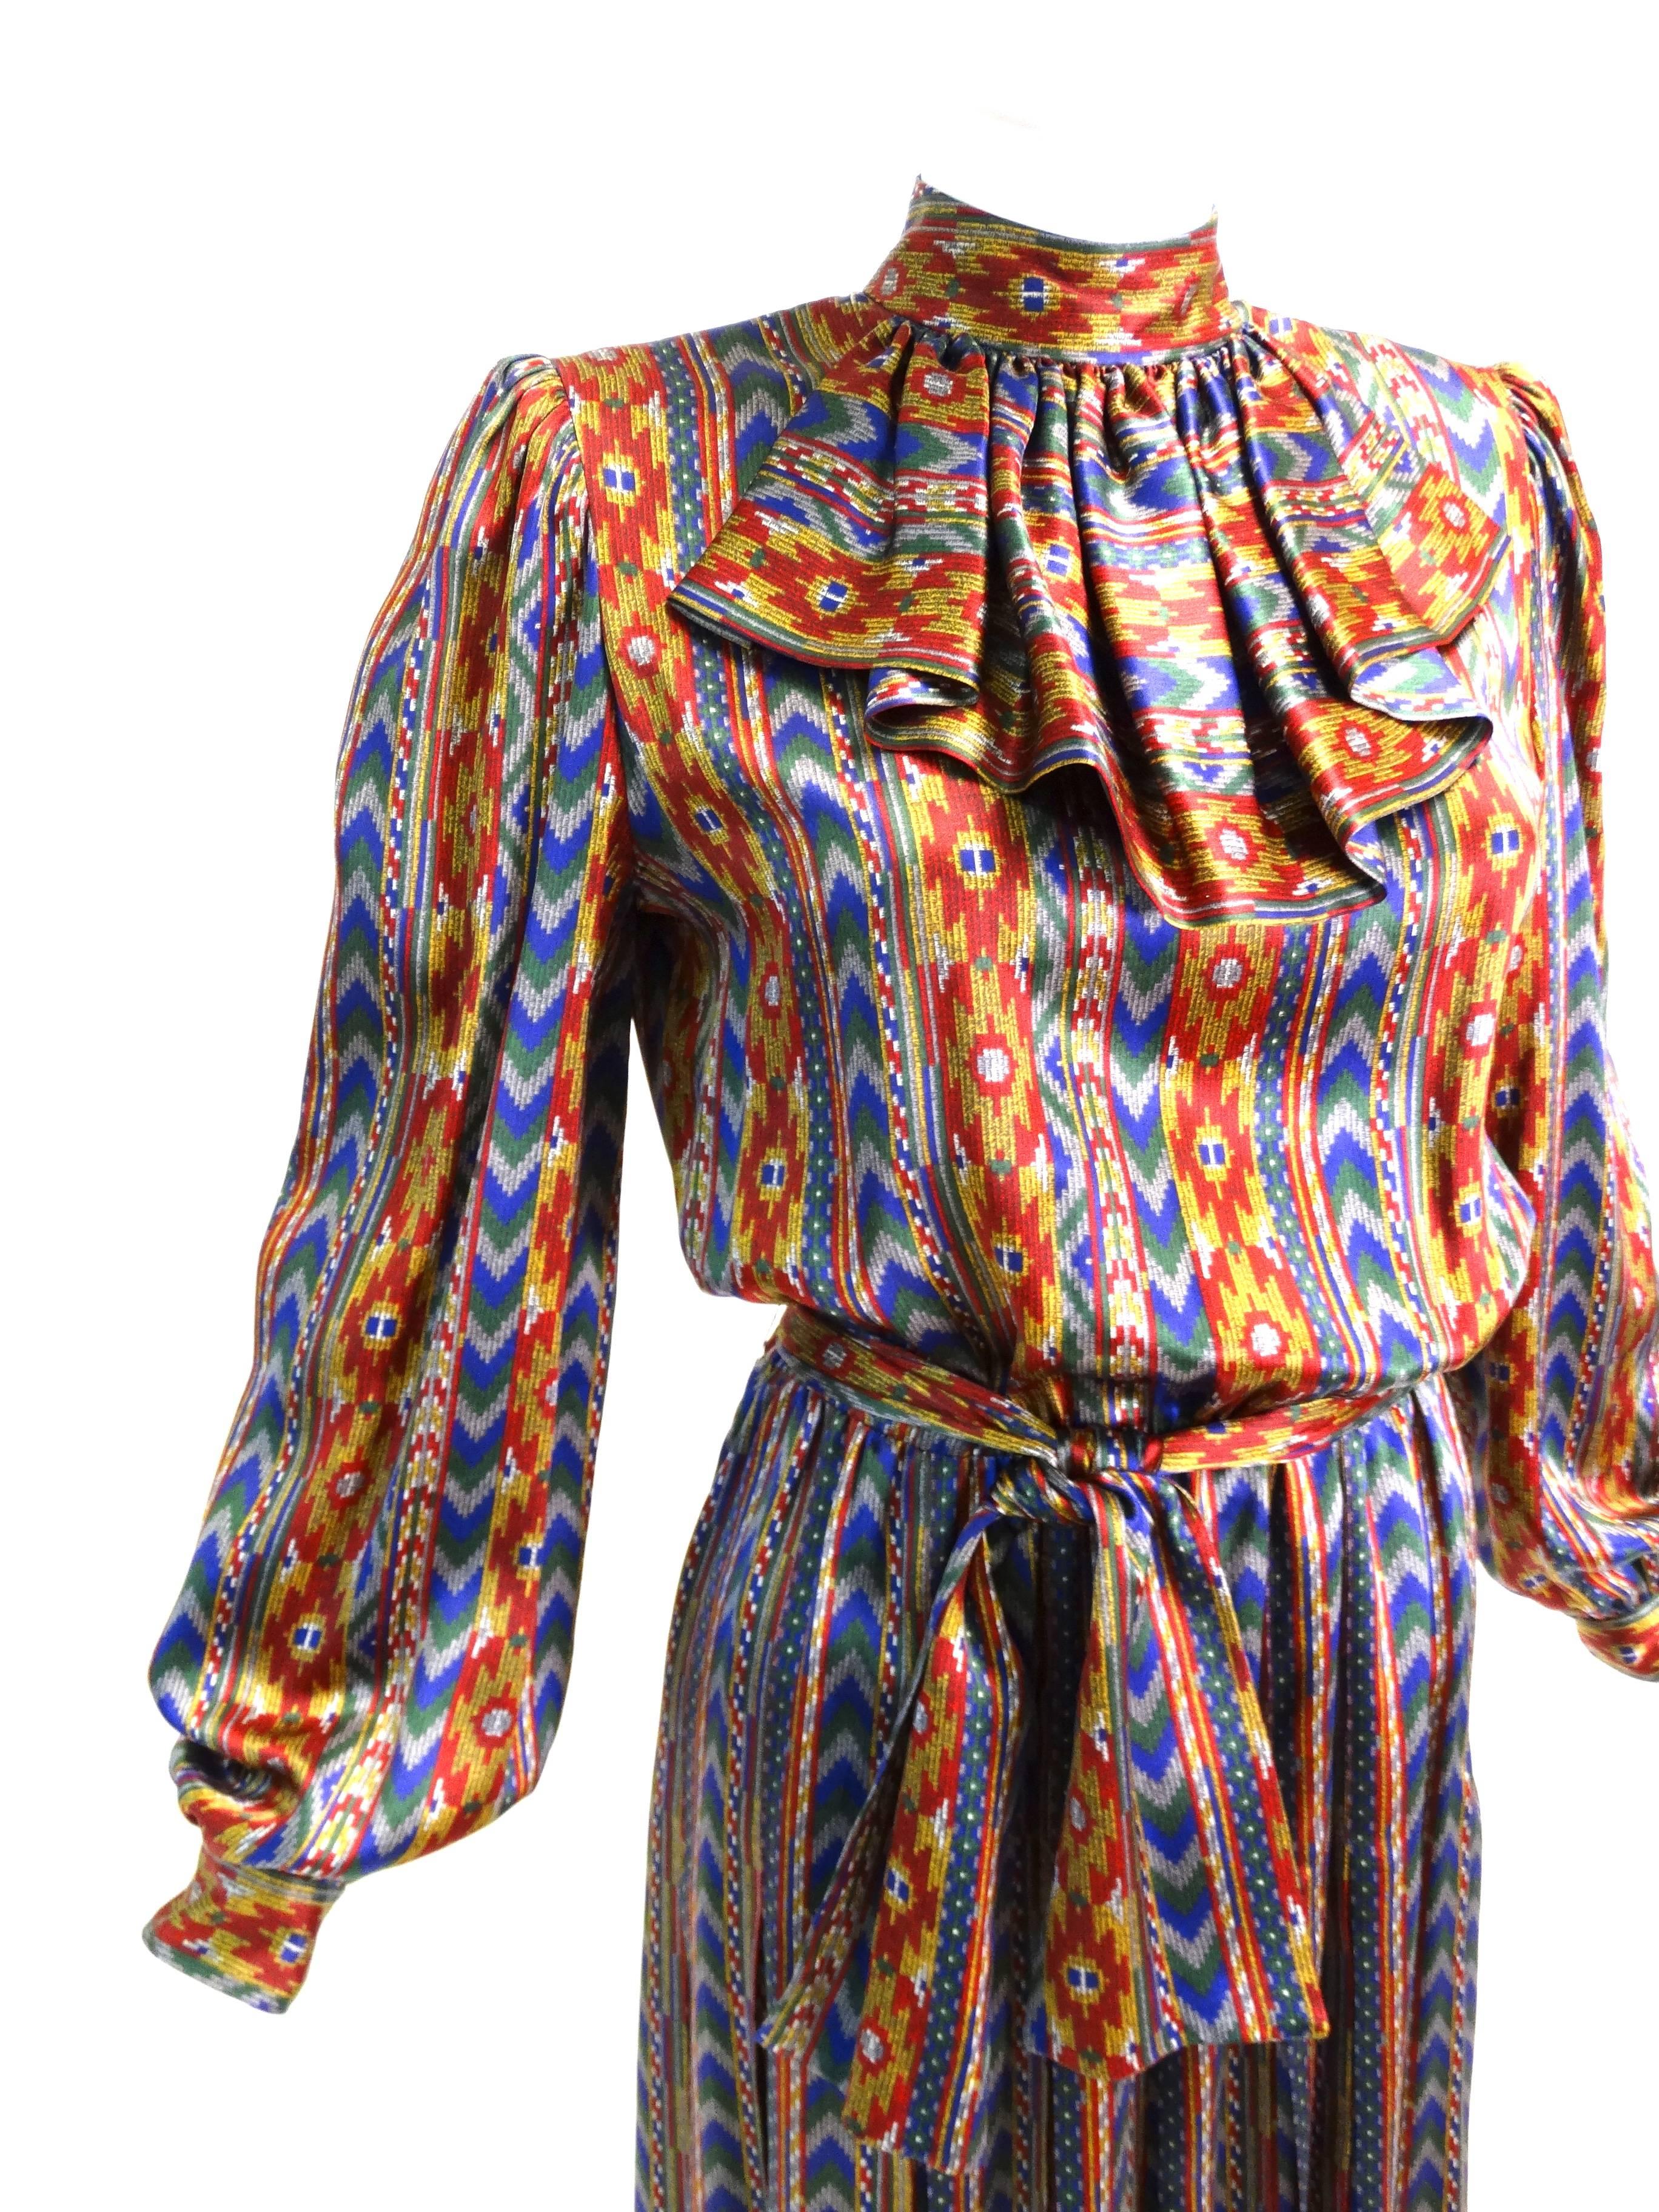 A fabulous dress by Givenchy for Nouvelle Boutique in Paris circa 1980's! A classic cut in silk with the most amazing aztec/southwest print. This piece has a high neck with a  victorian ruffled collar, so Givenchy! A true drop pleat on the pleated